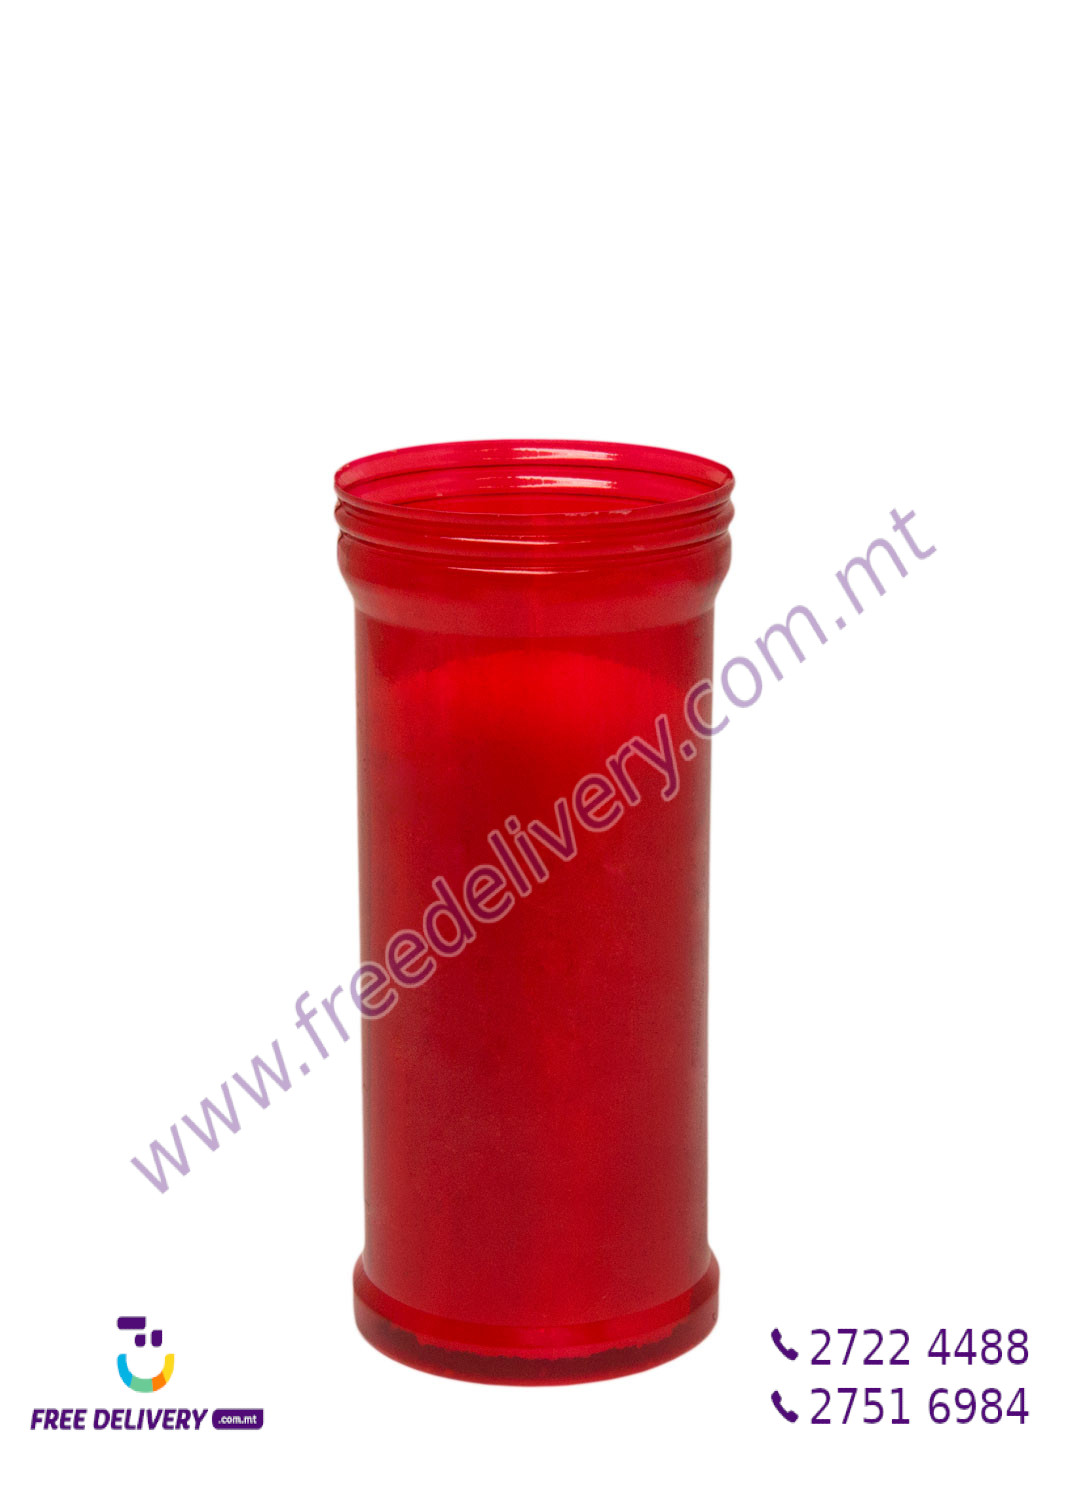 2 DAY RED CANDLE. VM010195